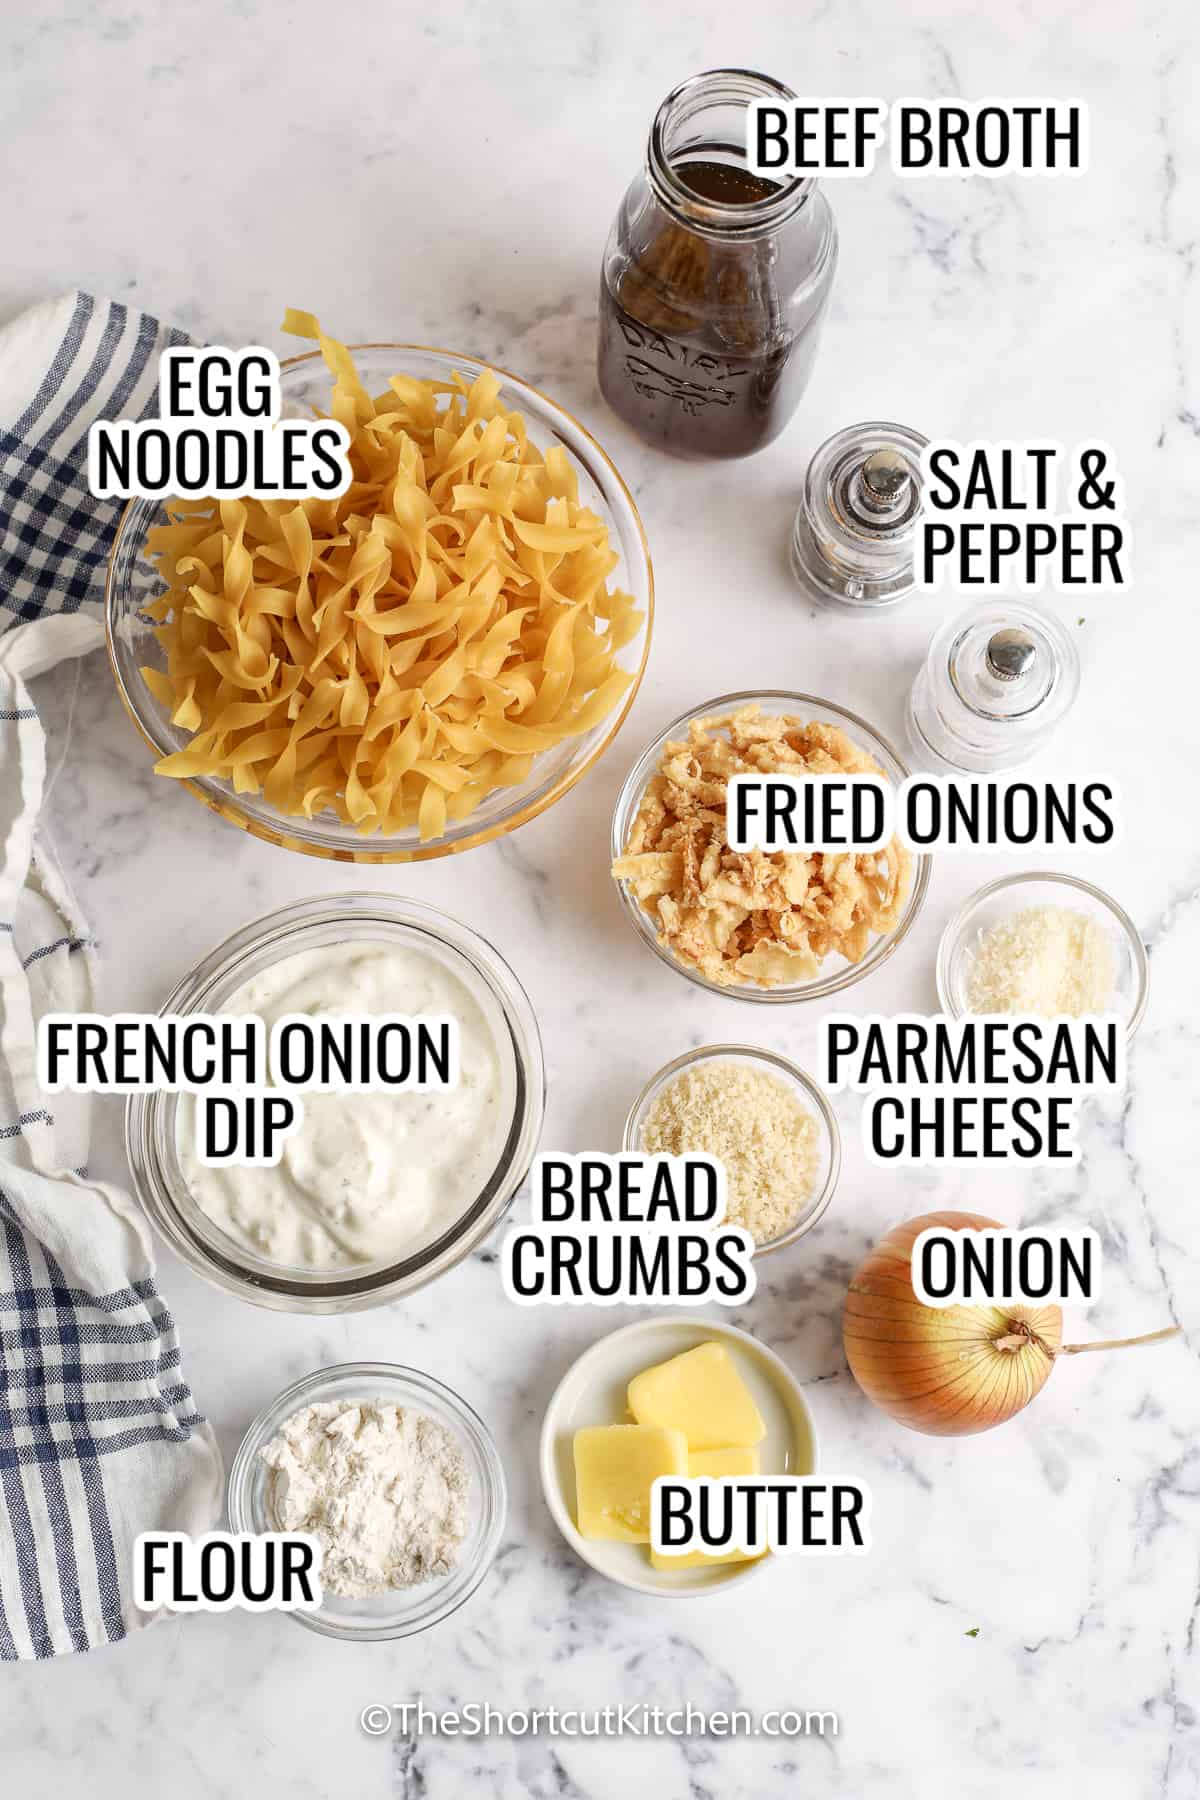 ingredients assembled to make french onion casserole, including egg noodles, beef broth, french onion dip, onion, and bread crumbs